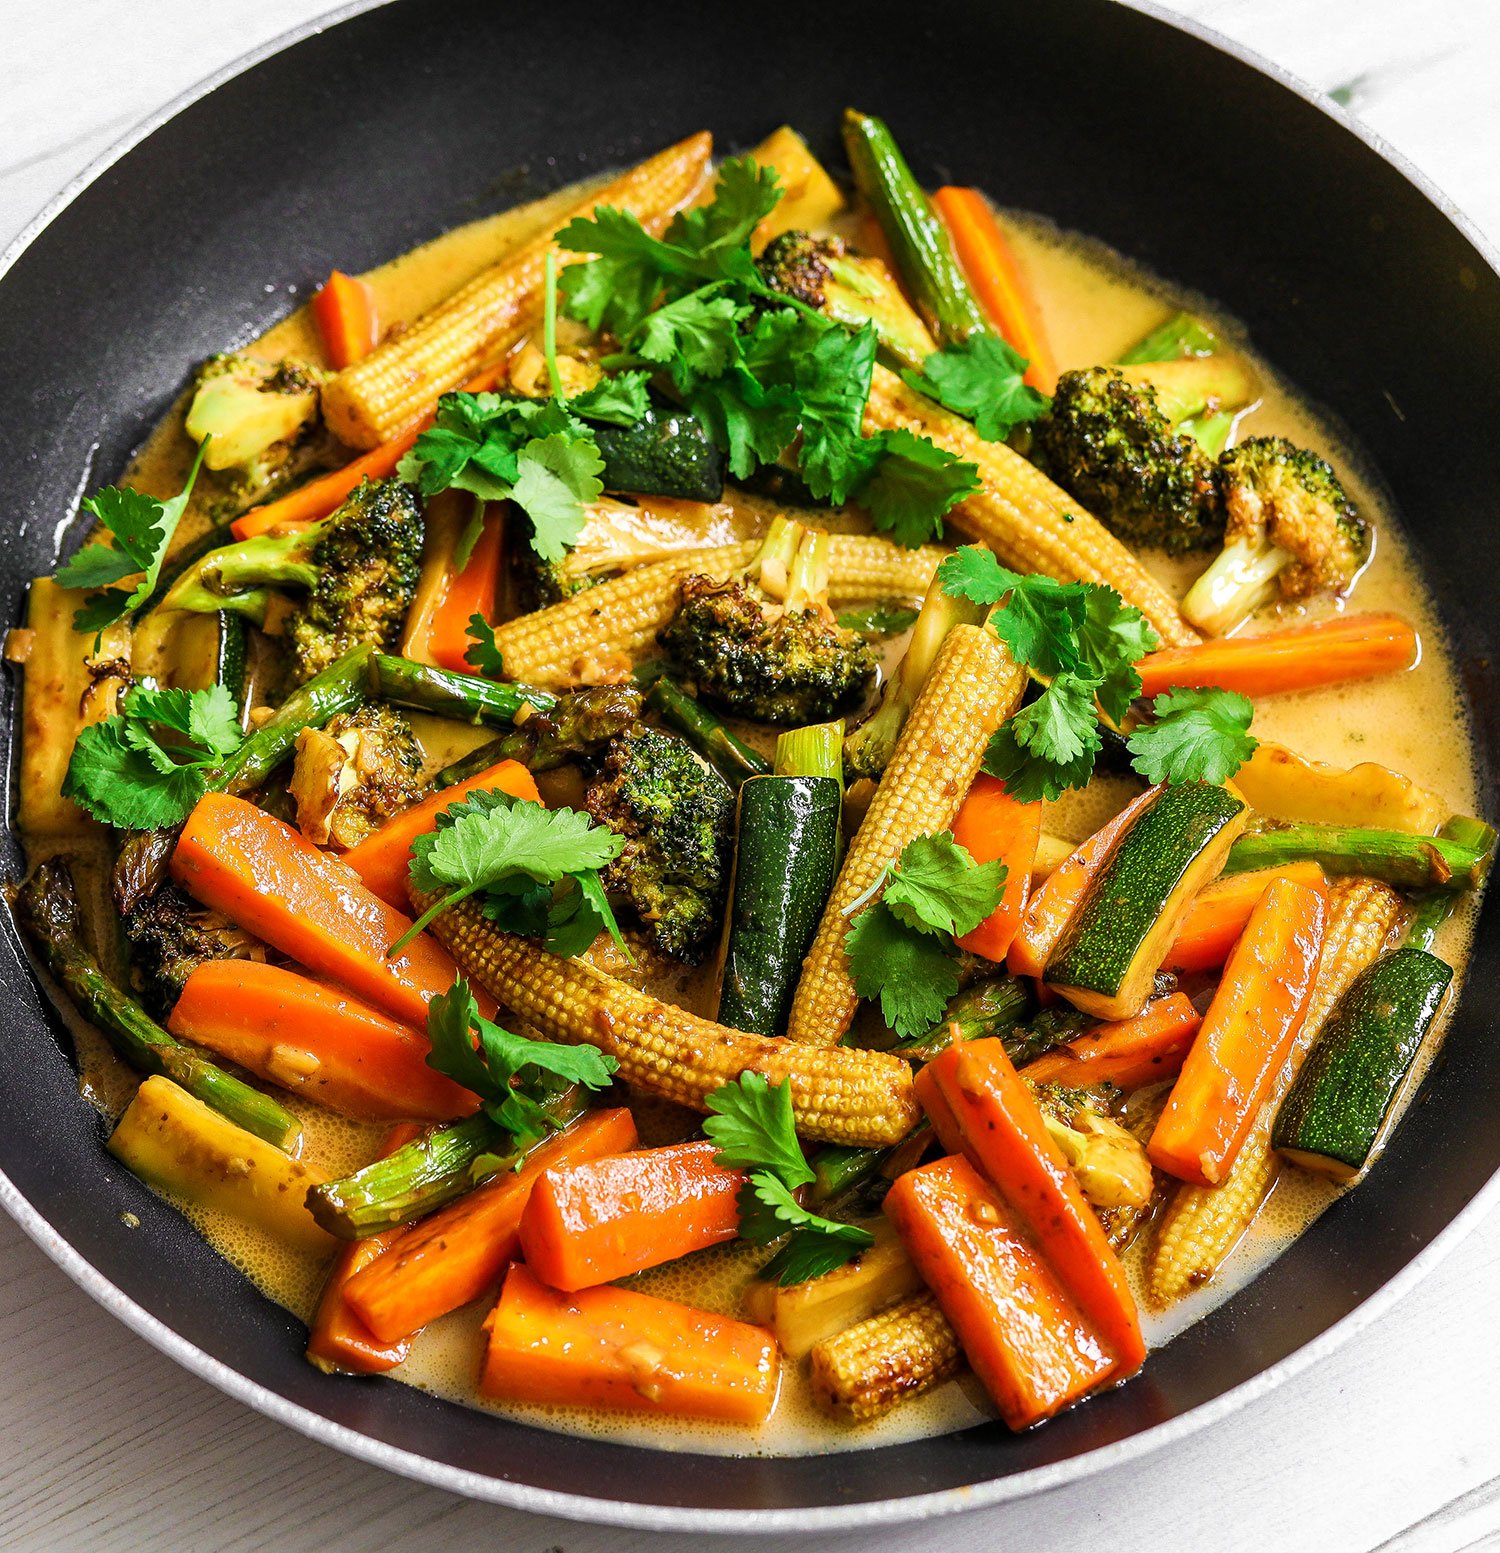 Tefal Actifry Green Curry with Crunchy Vegetables - Nadia's Healthy Kitchen